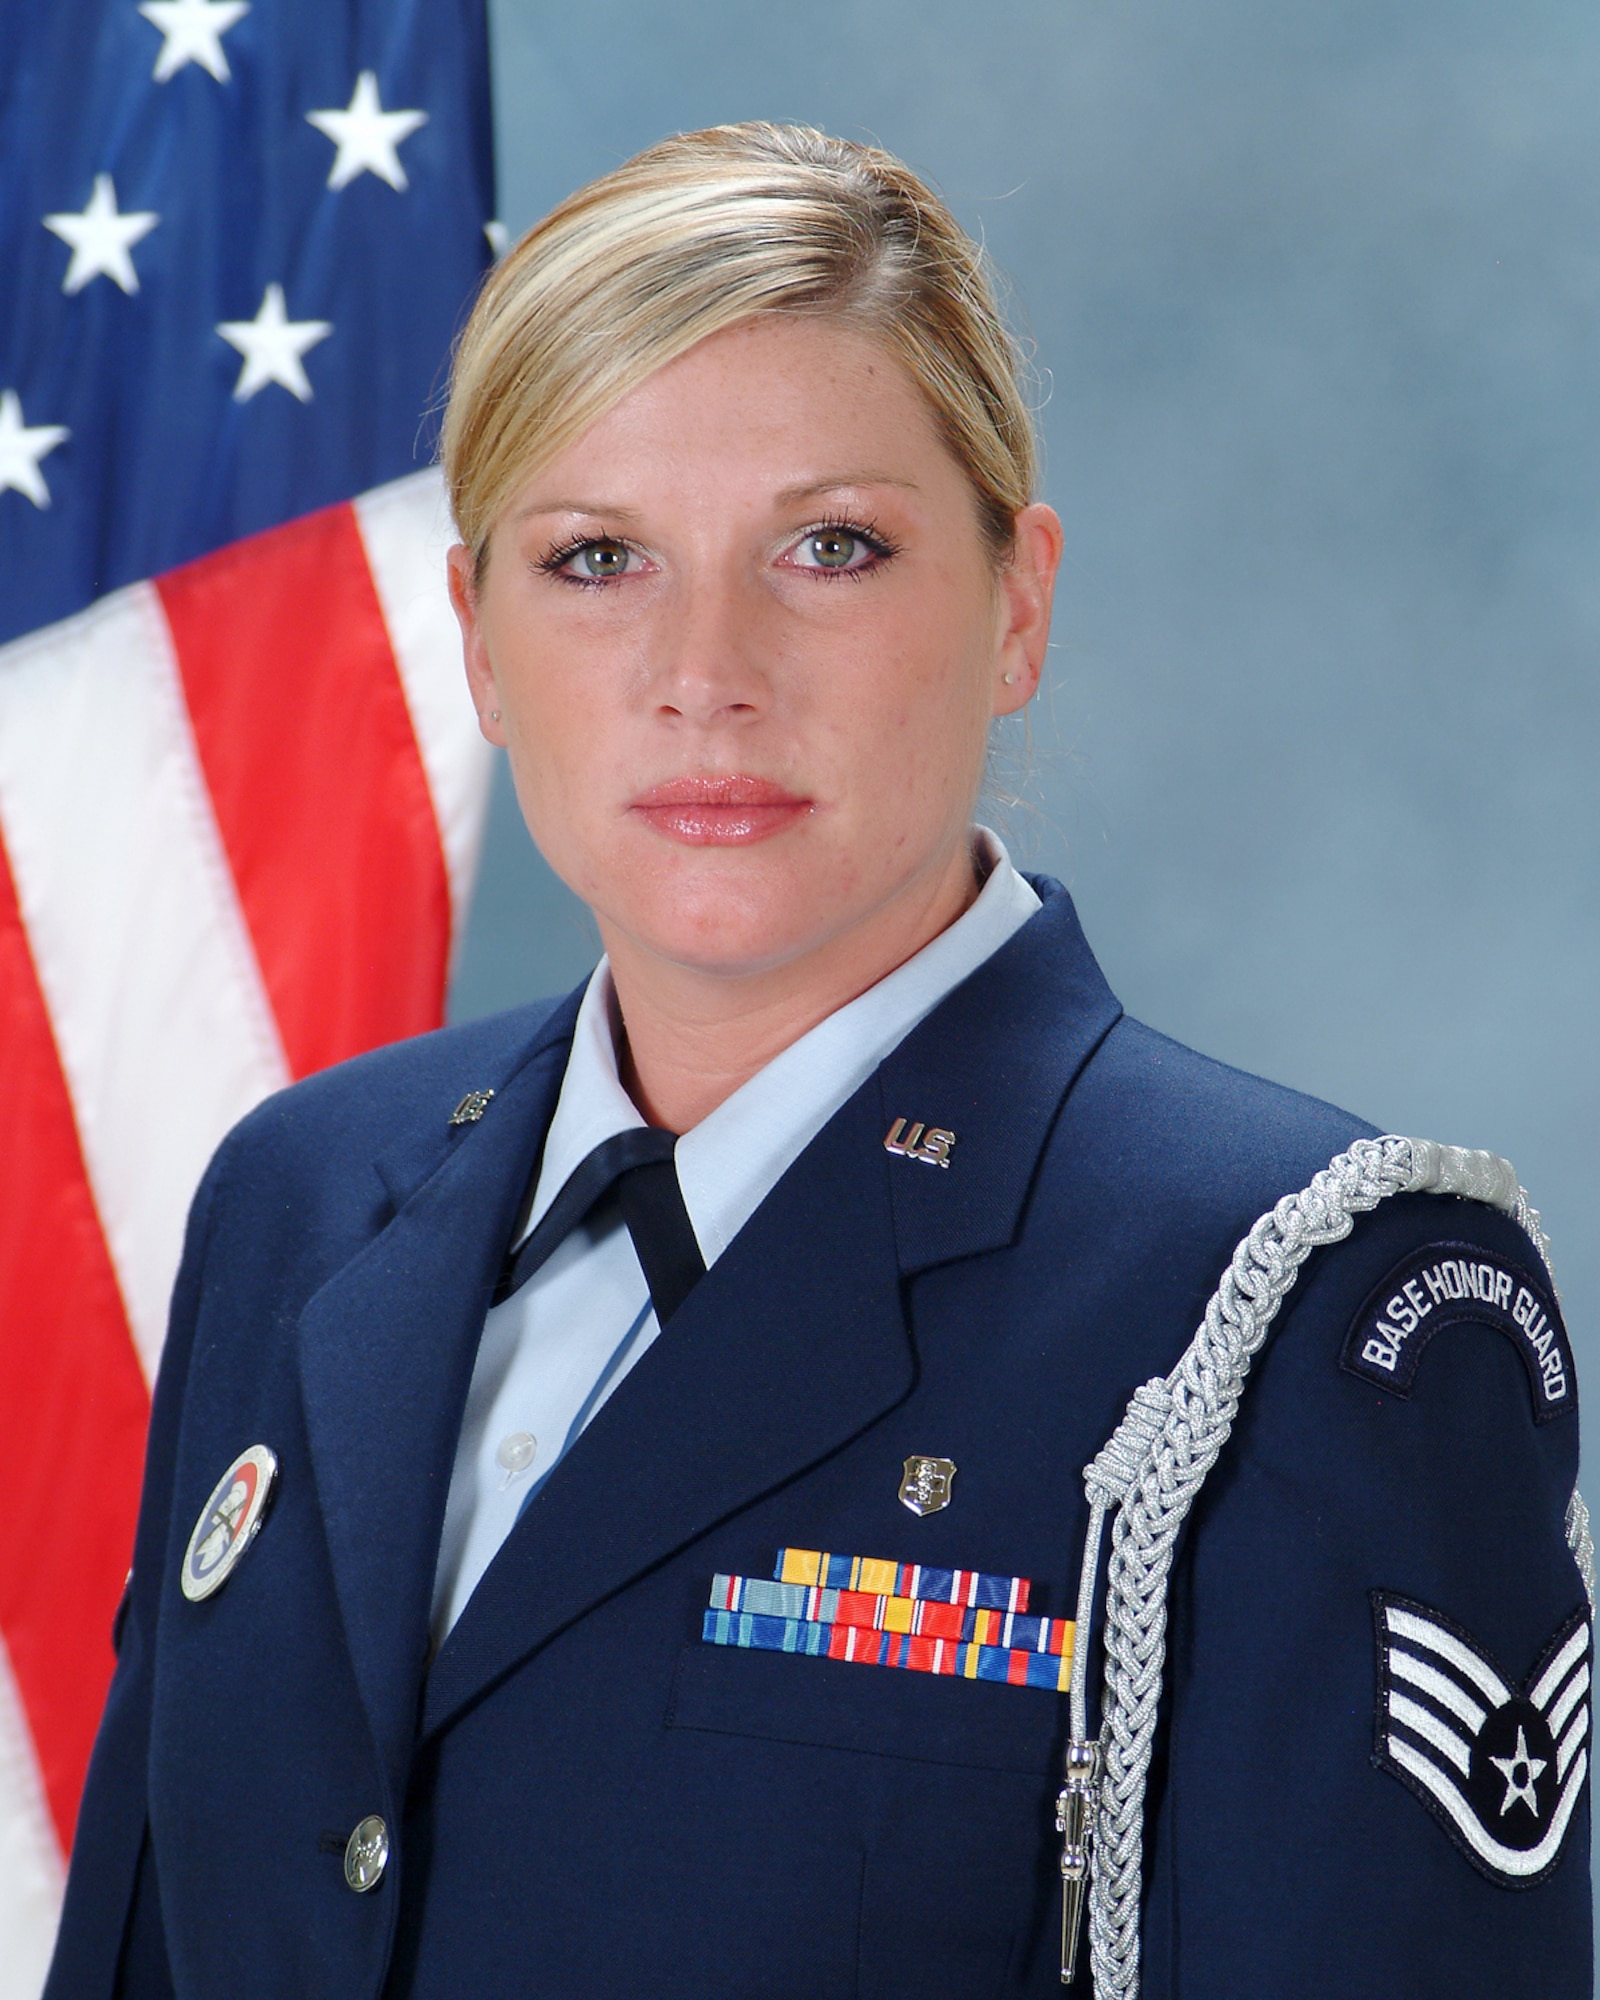 Staff Sgt. Cari Ellis, 21st Medical Support Squadron, 21st Medical Group, is a dynamic Honor Guard leader. She orchestrated and ensured completion of 34 funerals, 74 military events and 23 civil events. She serves as the team expert, instructing new officers on Honor Guard procedures, and instructing NCO Academy and Airman Leadership School students on proper drill movements for parades. She was hand-picked for the Air Force Space Command’s change of command ceremony. She is a master of resource scheduling. She oversees manning for a 13-plus member team, which provides 100 percent coverage of details in one of the largest areas of responsibility in the U.S. Sergeant Ellis is a role model and mentor to all 21st Space Wing Honor Guard Members. (U.S. Air Force photo)
